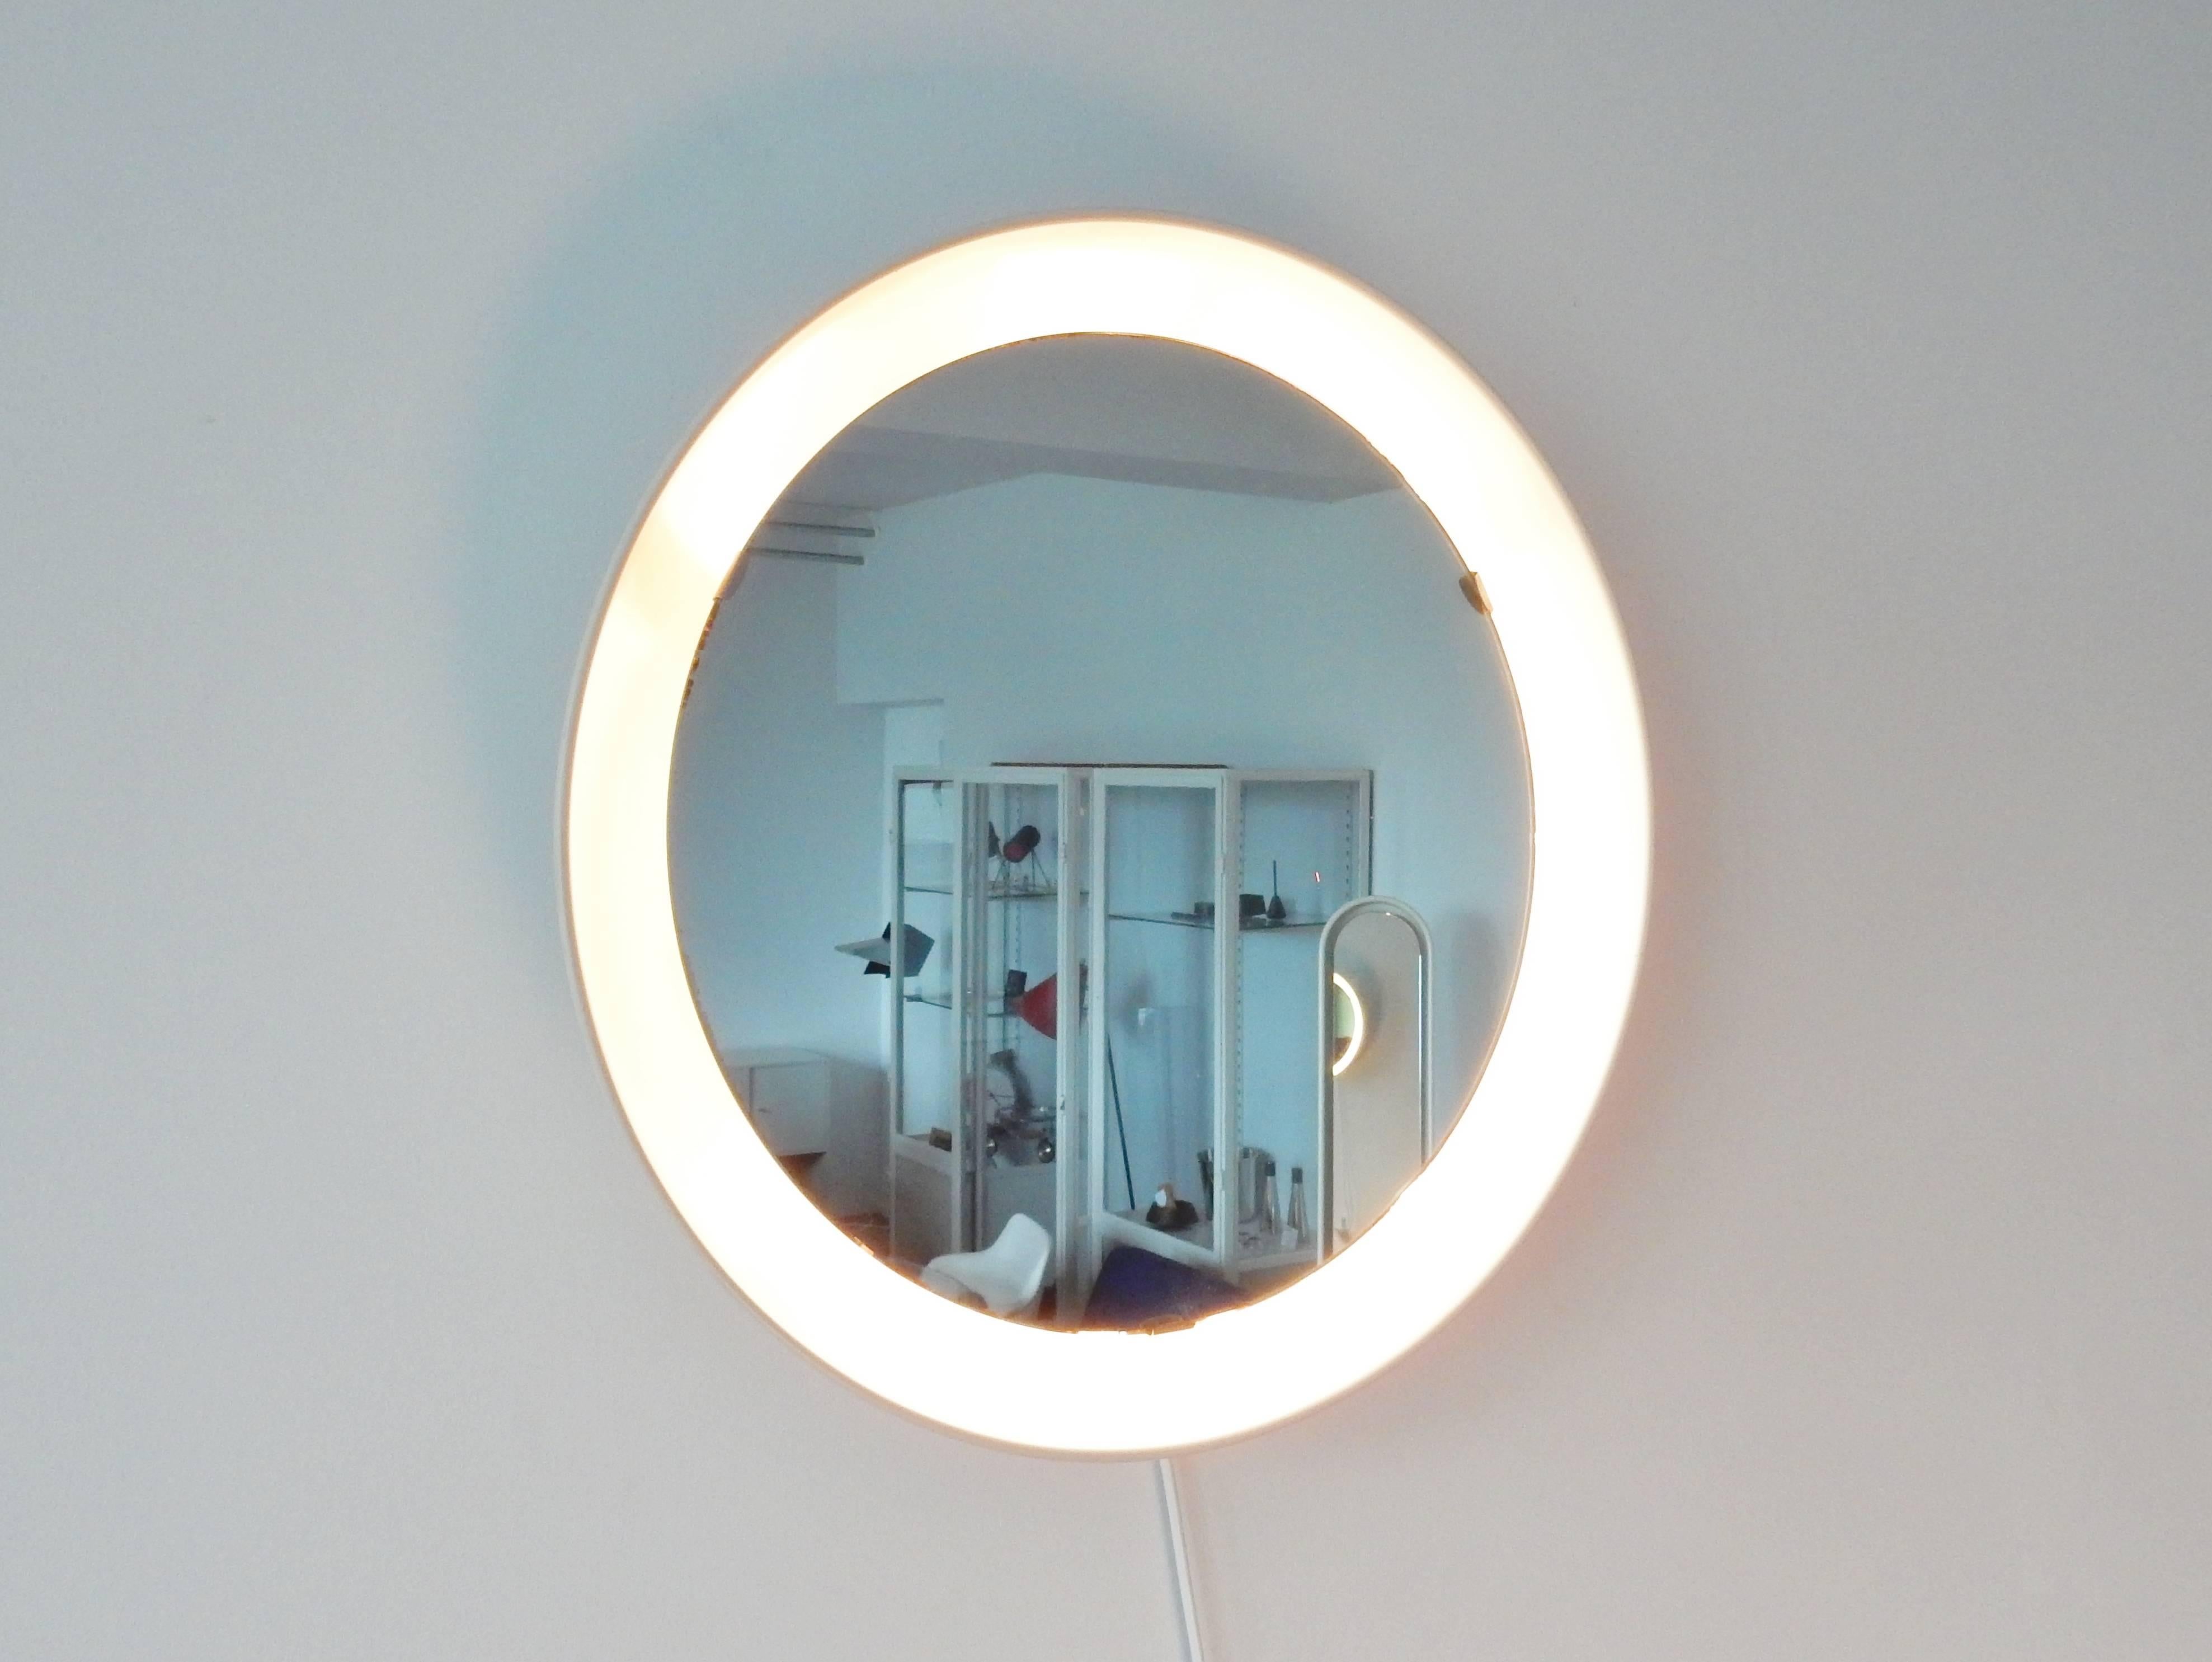 This mirror is quite a rare find. The short production period makes it a scarce product. The round glass mirror is placed into a large white lacquered aluminum round bowl that holds three-light bulbs. The light comes from behind the mirror and gives